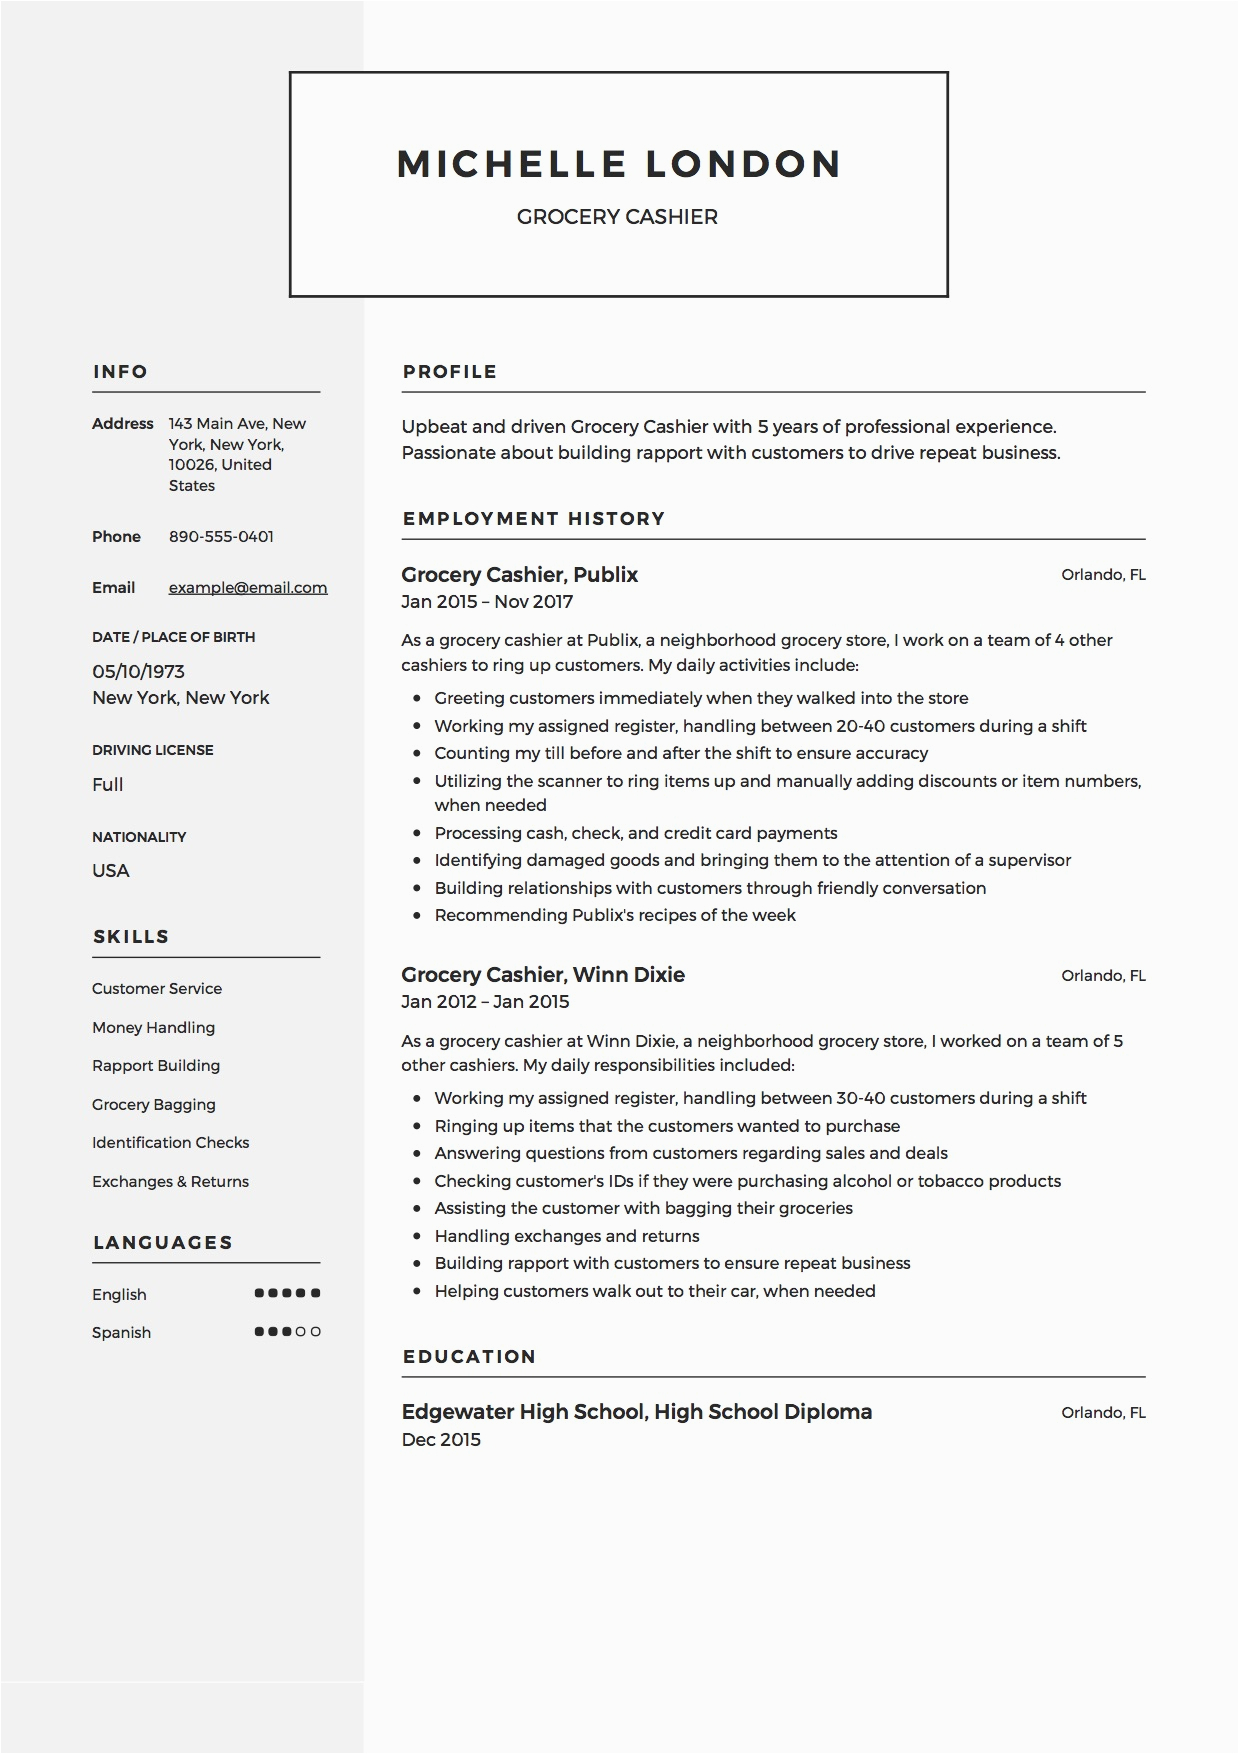 Sample Resume for Grocery Store Cashier Grocery Cashier Resume Guide 12 Example Pdf S